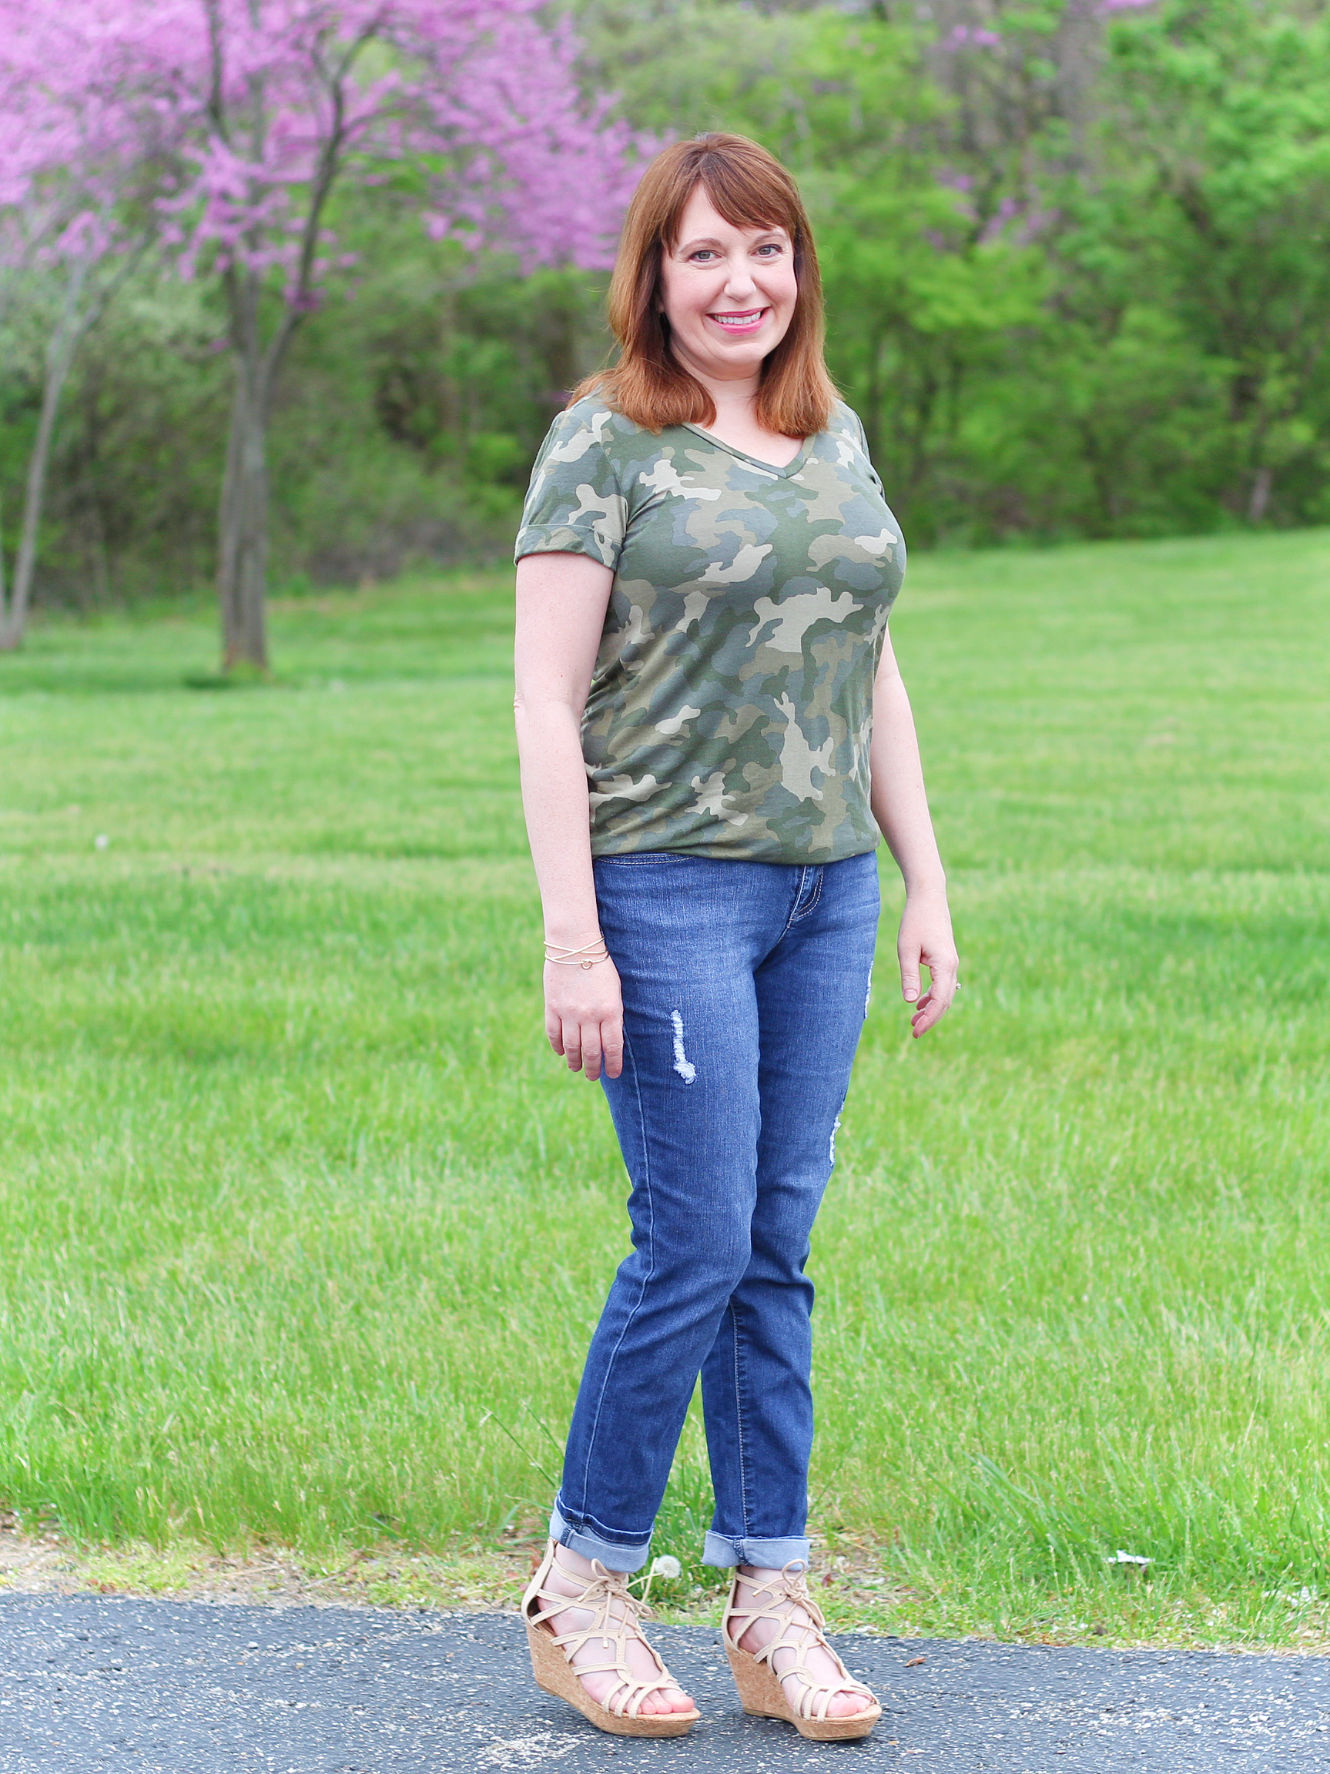 Camo Tee And Jeans Spring Outfit #fashion #style #over40fashion #fashionblog